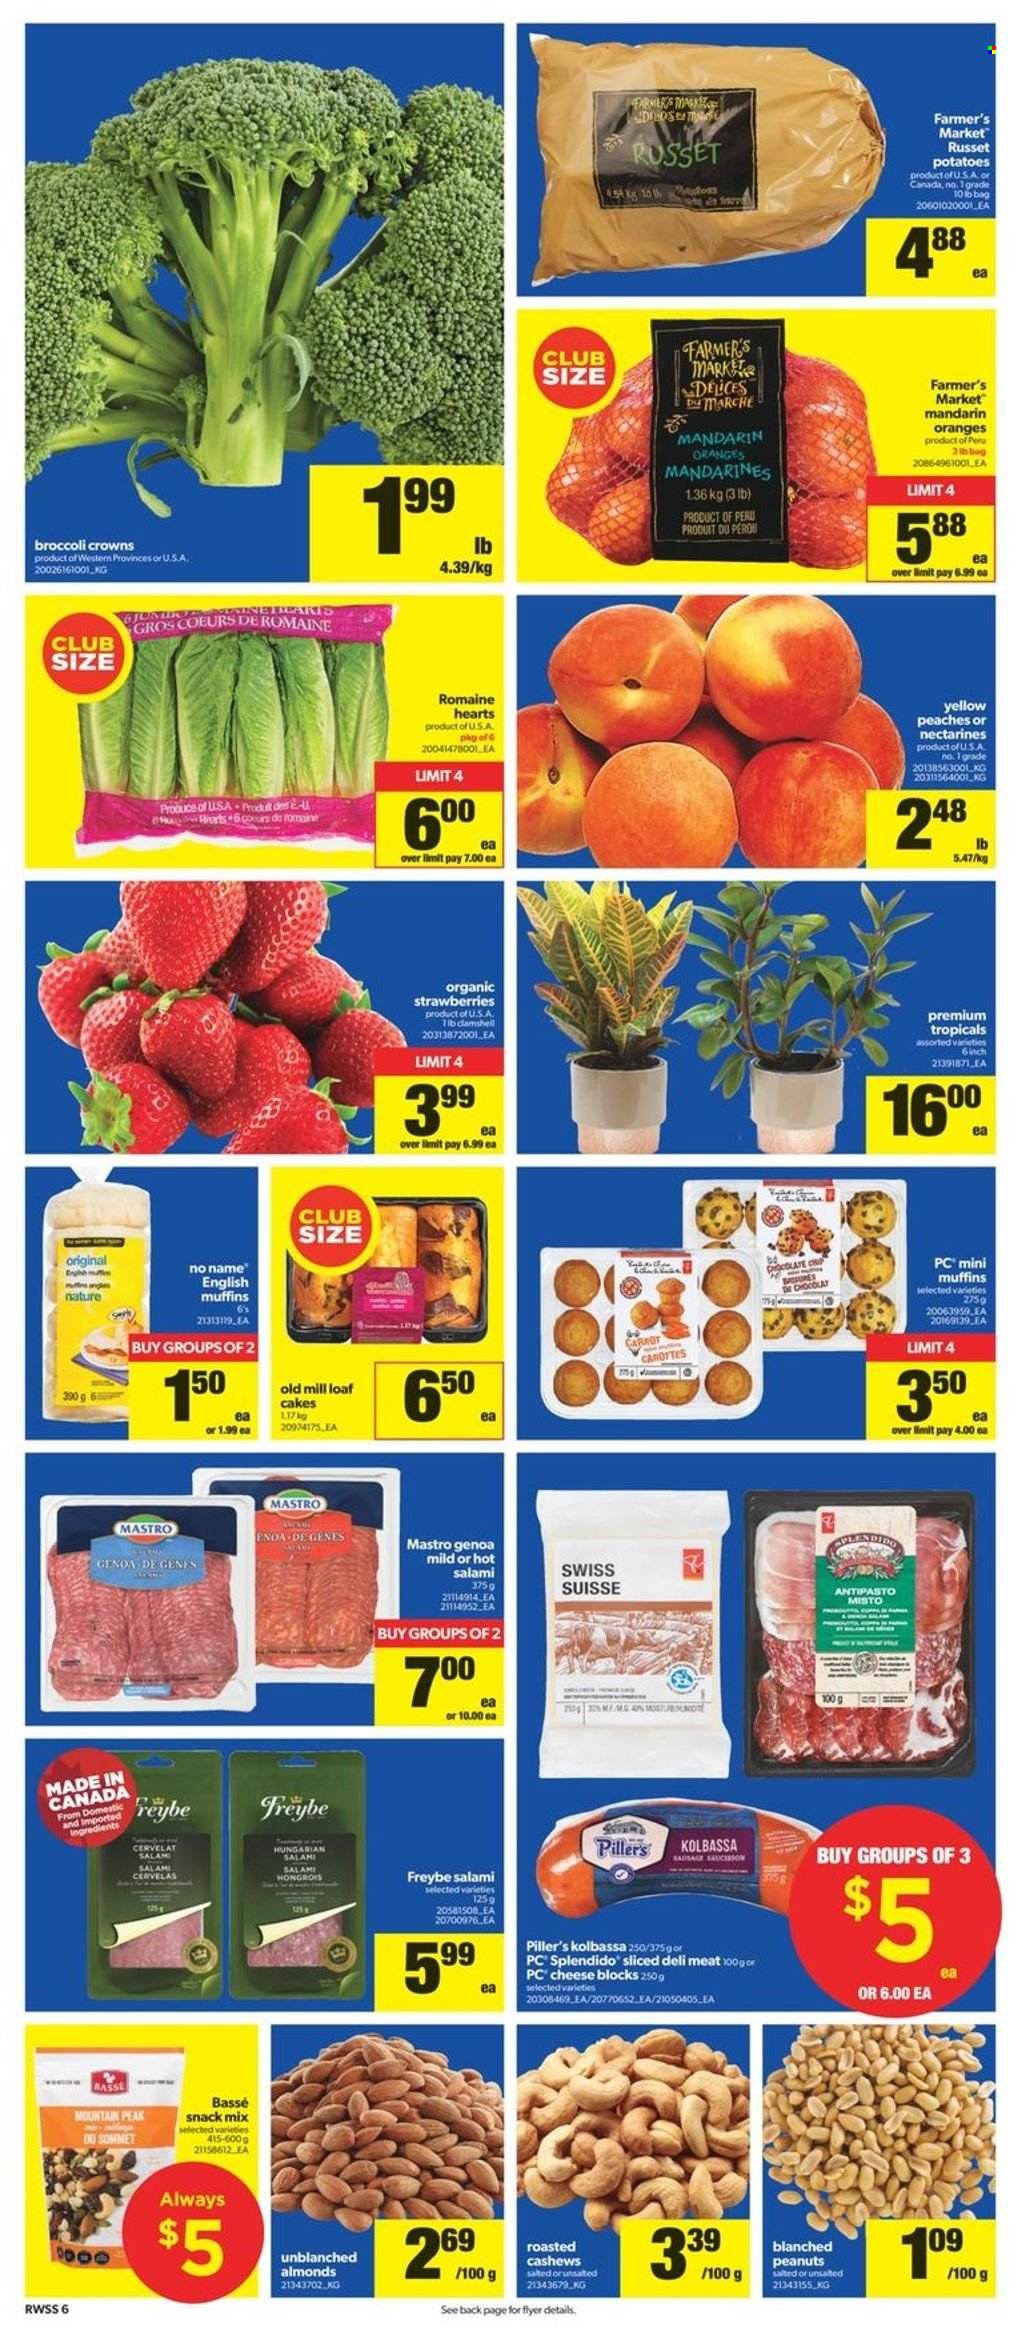 thumbnail - Real Canadian Superstore Flyer - June 30, 2022 - July 06, 2022 - Sales products - english muffins, cake, russet potatoes, potatoes, mandarines, nectarines, peaches, No Name, salami, sausage, cheese, chocolate, snack, almonds, cashews, peanuts, oranges. Page 7.